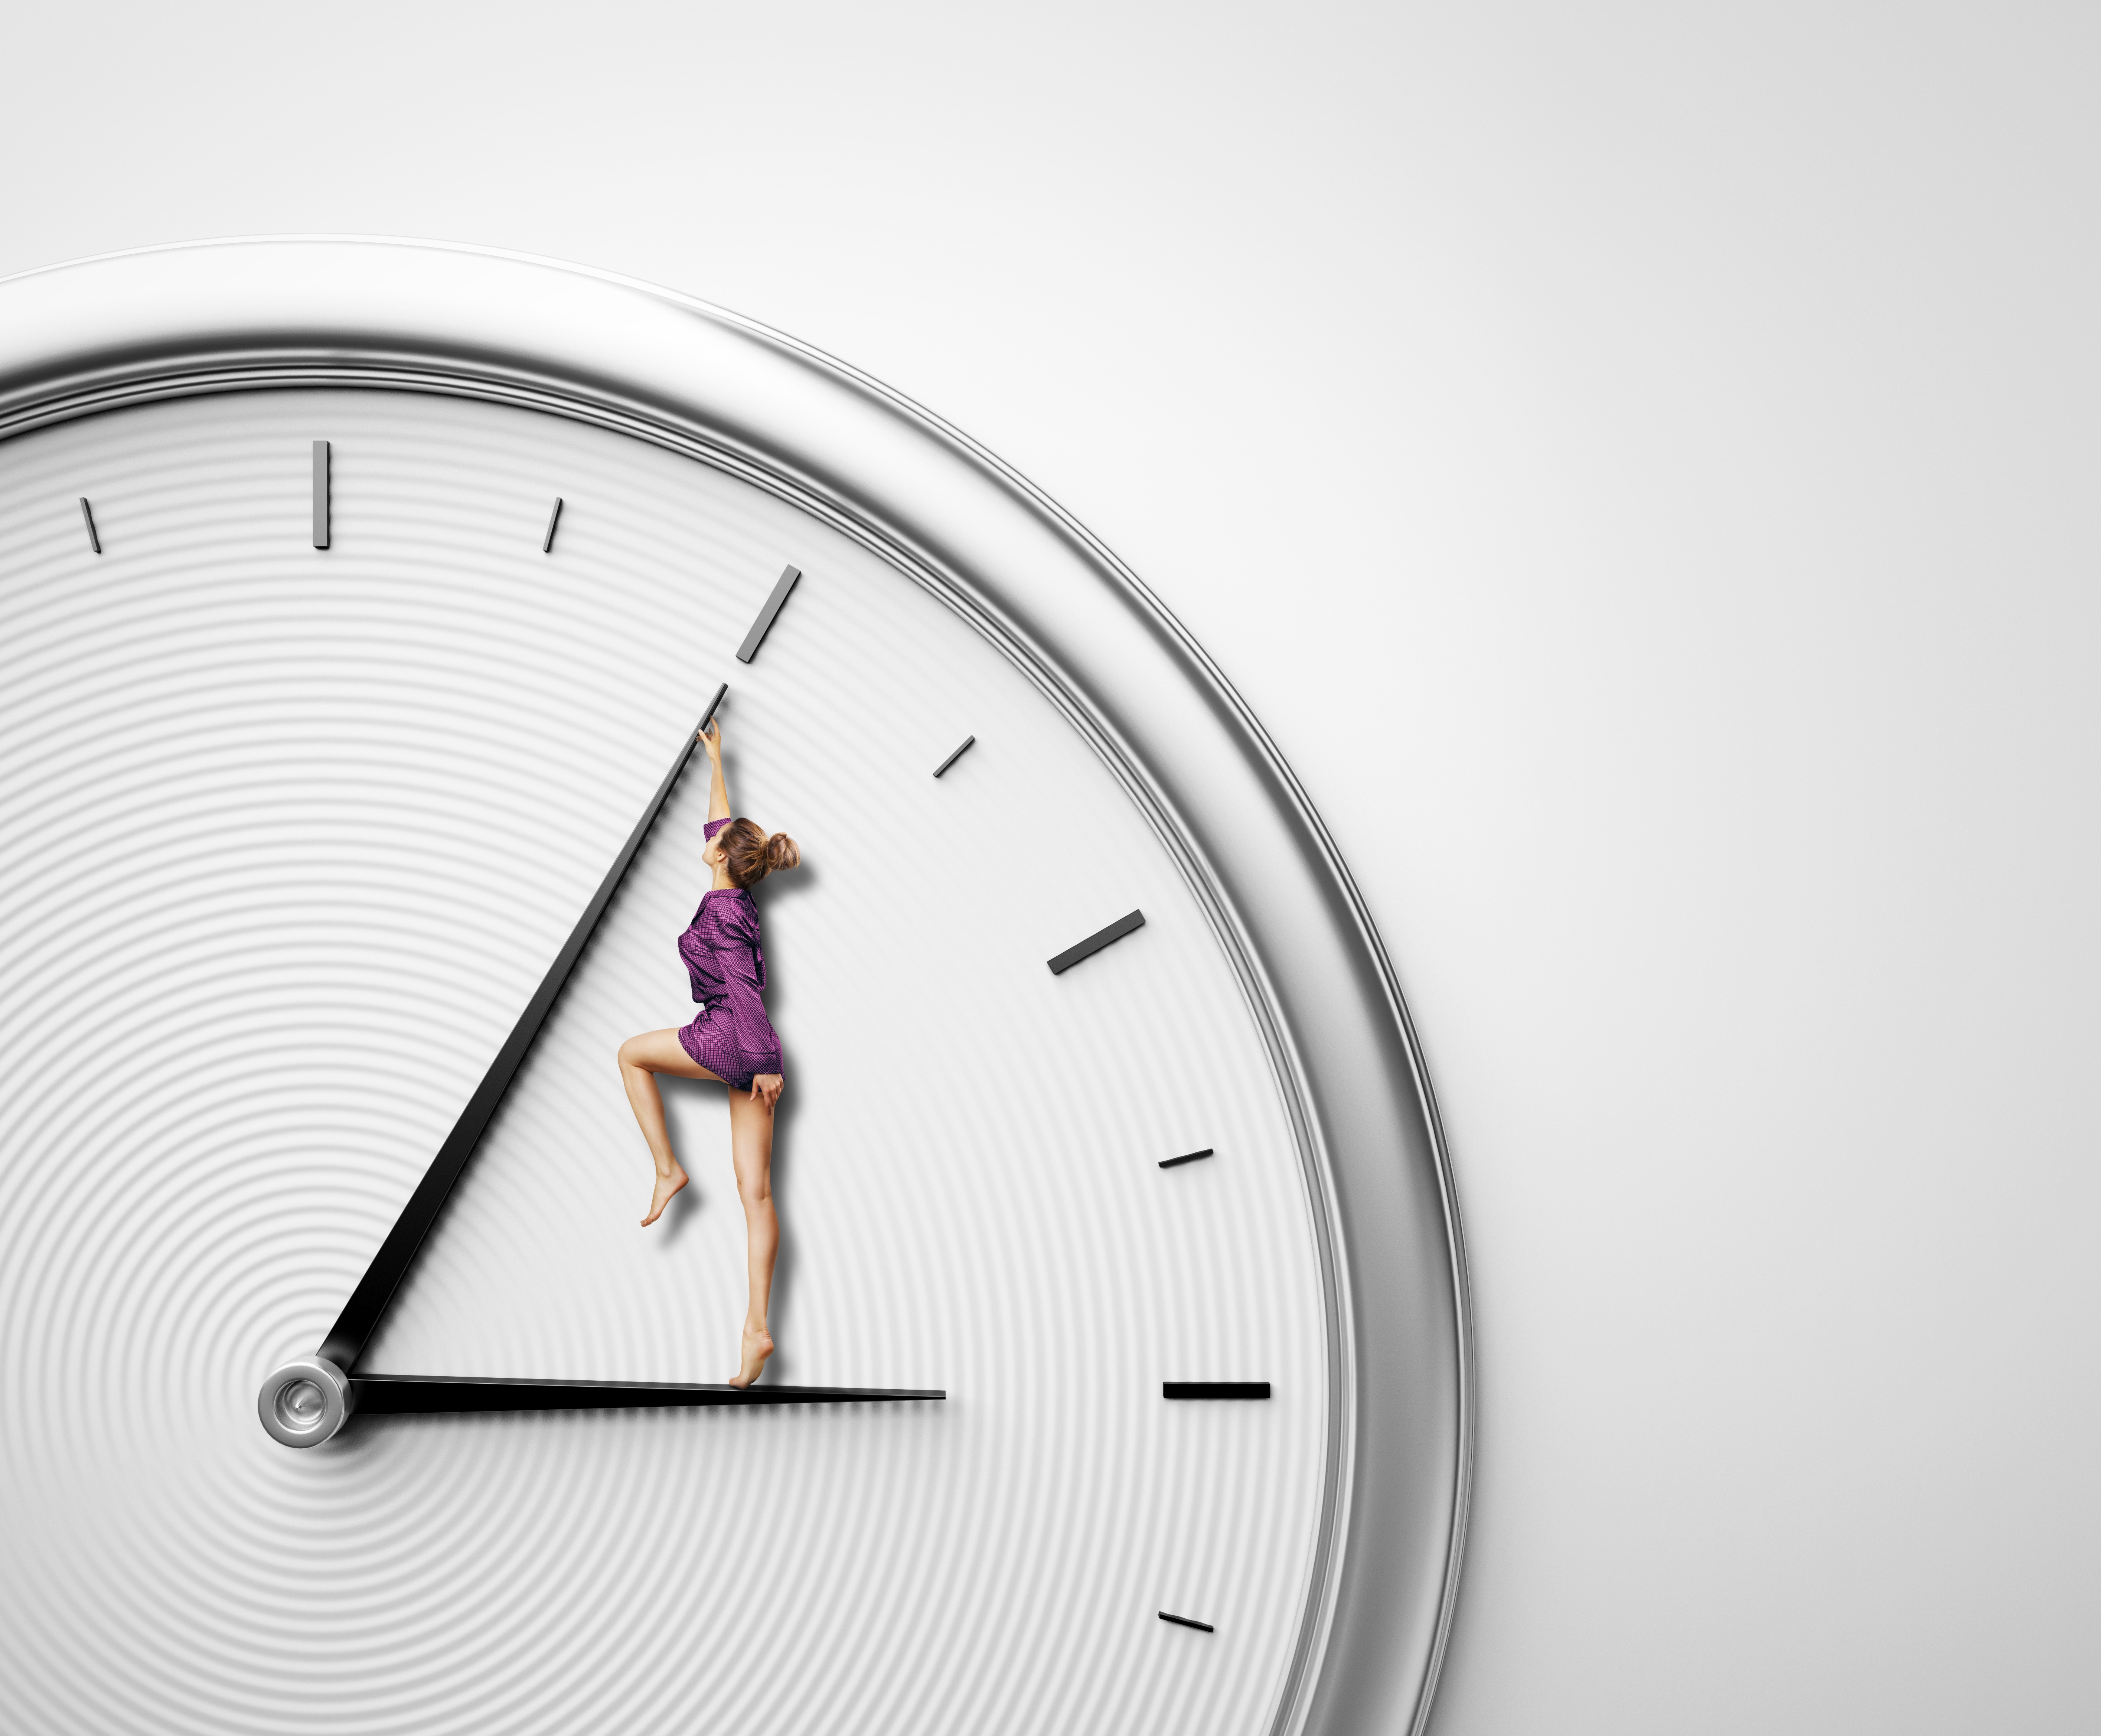 woman in a purple jumper standing on hour hand of clock and pushing minute hand backward